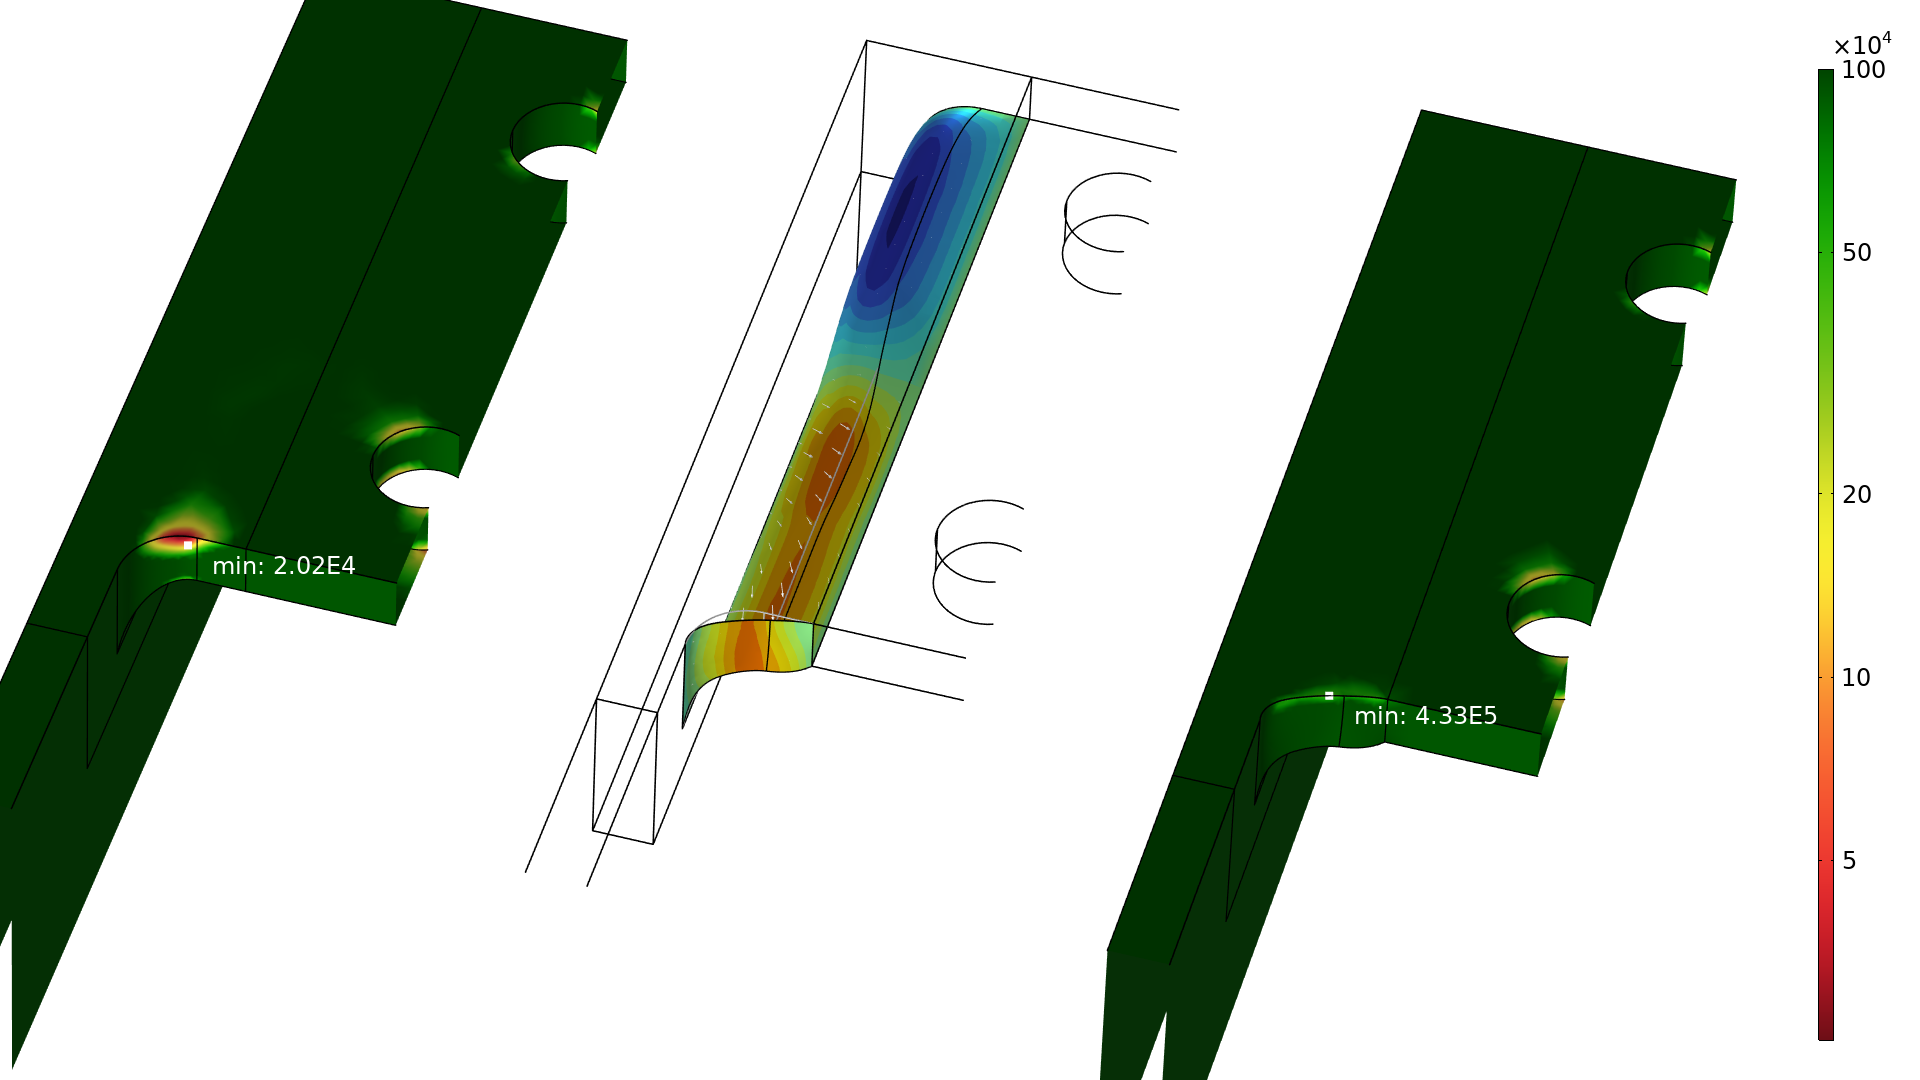 Two close-up plots of a cutout of the bracket model show the increase in the number of cycles to failure between the initial fillet design (left) and the shape-optimized design (right). In the middle, a plot illustrates the shape change, with the Rainbow color scale corresponding to areas where material has been added or removed.